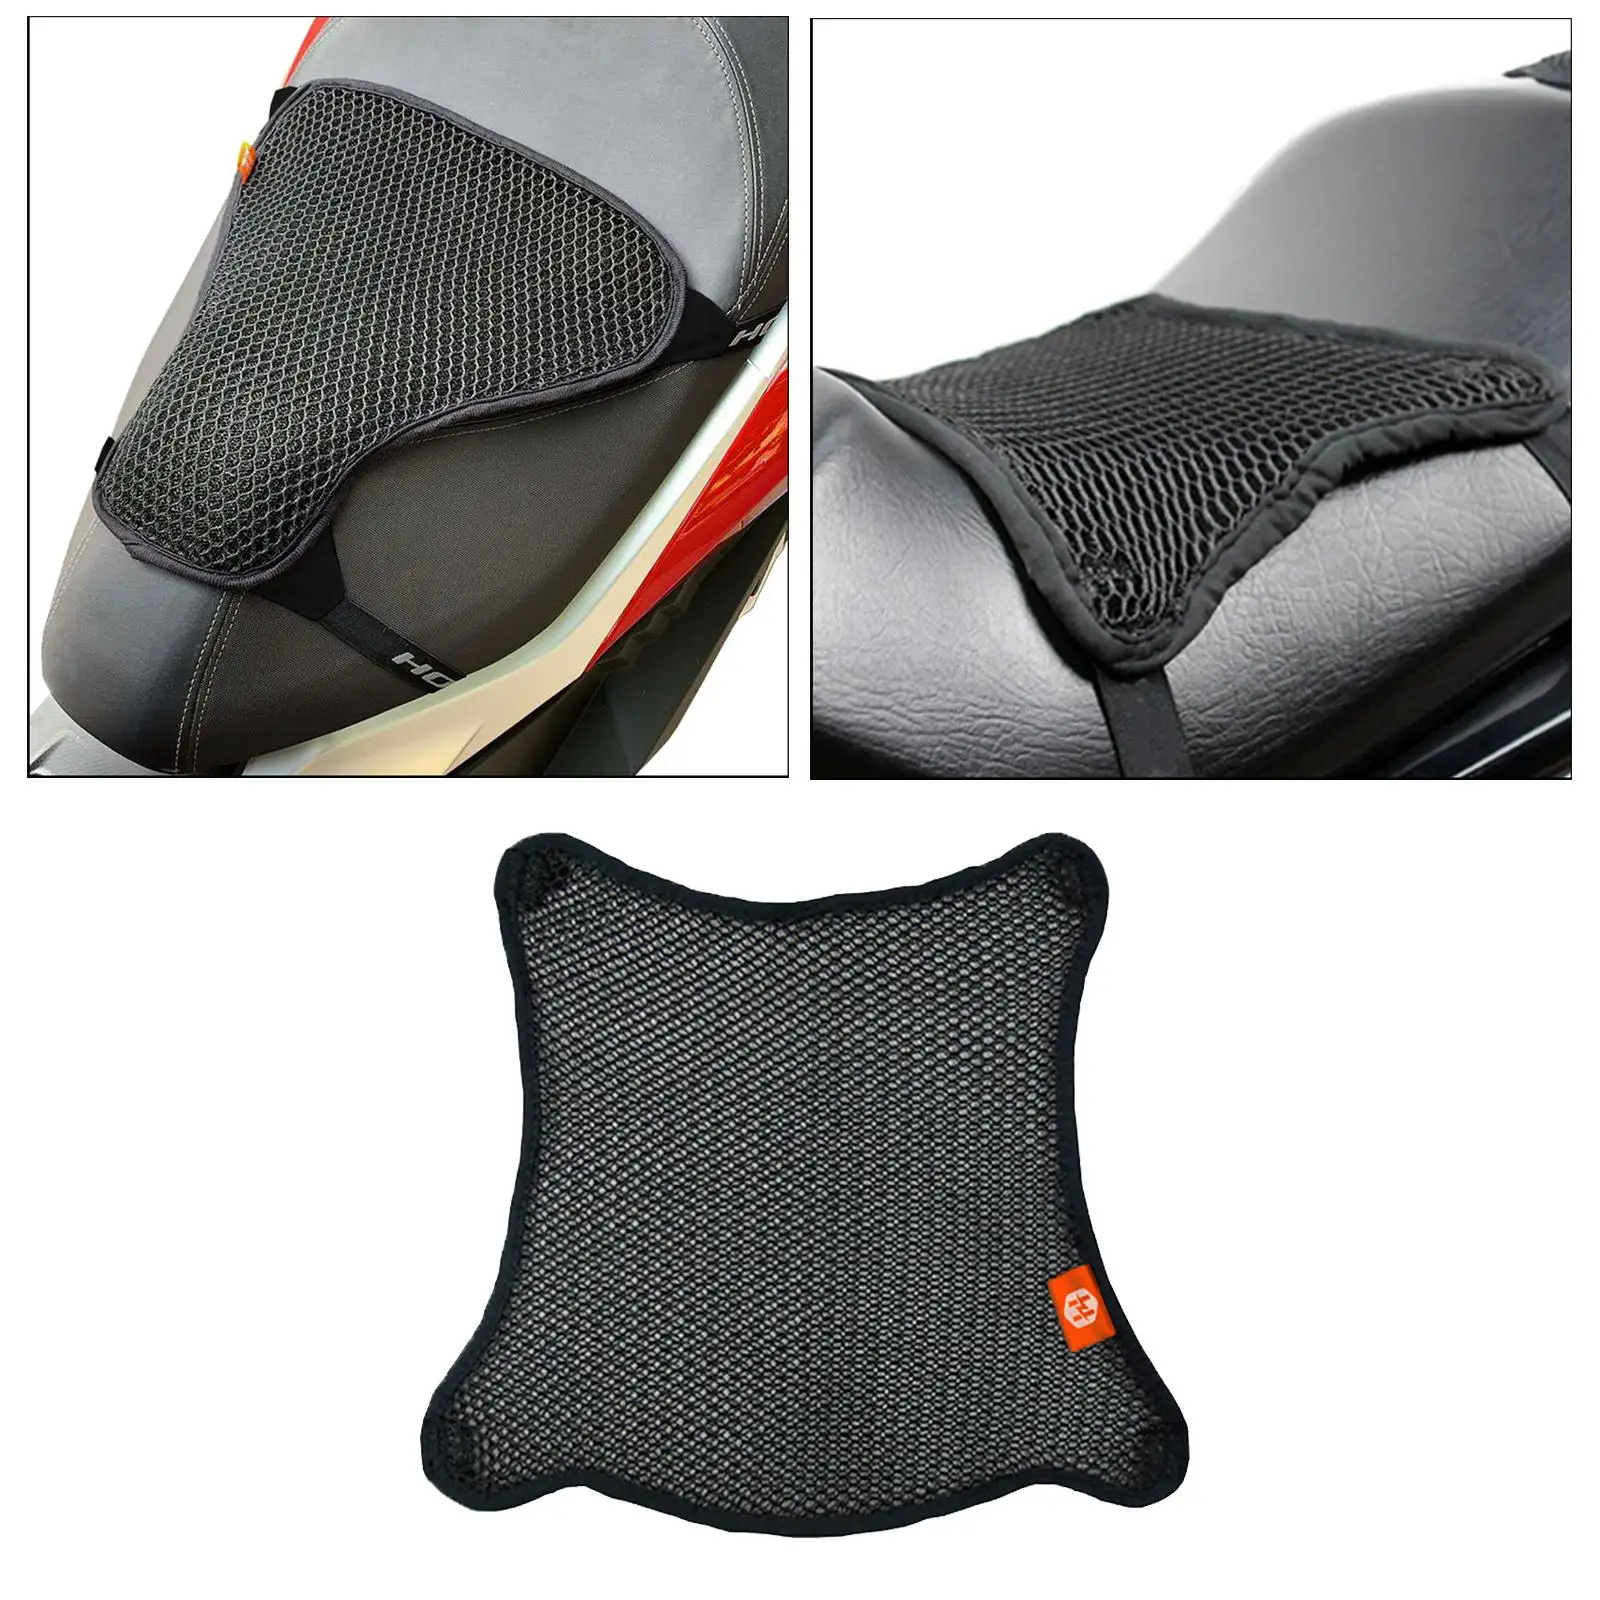 Motorcycle Seat Cushion Breathable Reduces Pressure and Fatigue Cruiser